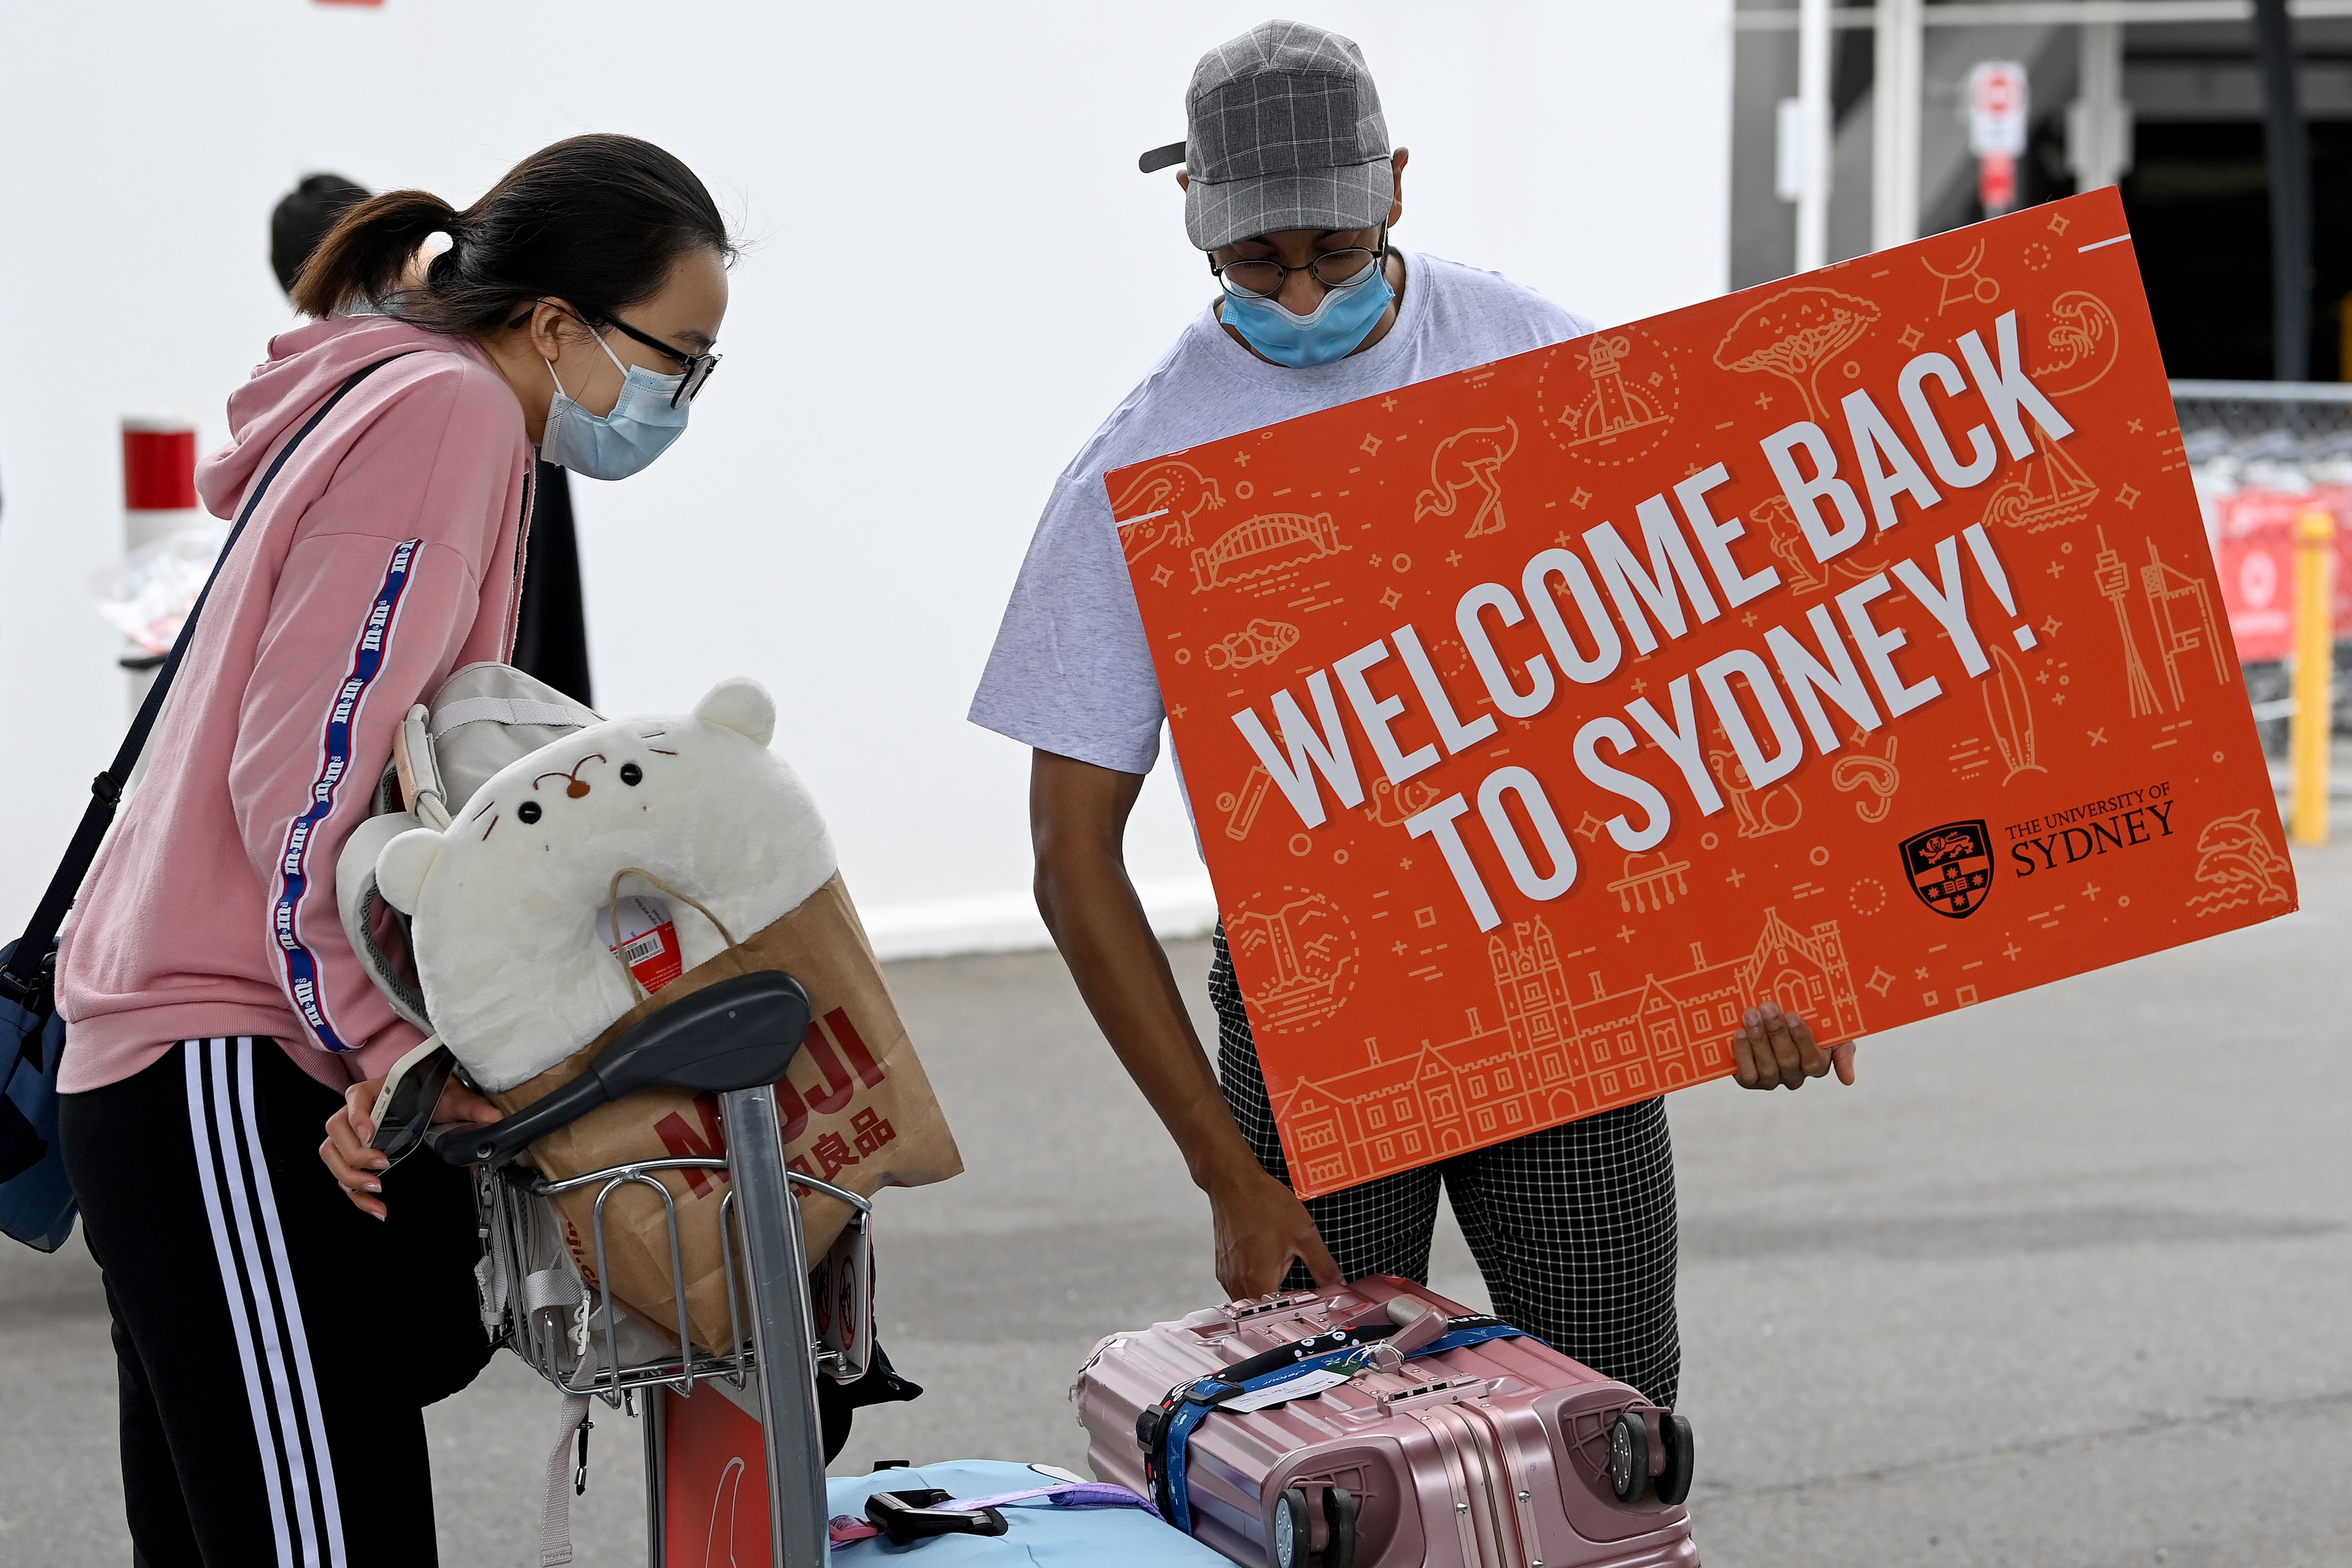 University representatives hold signs as international students arrive at Sydney Airport in Sydney